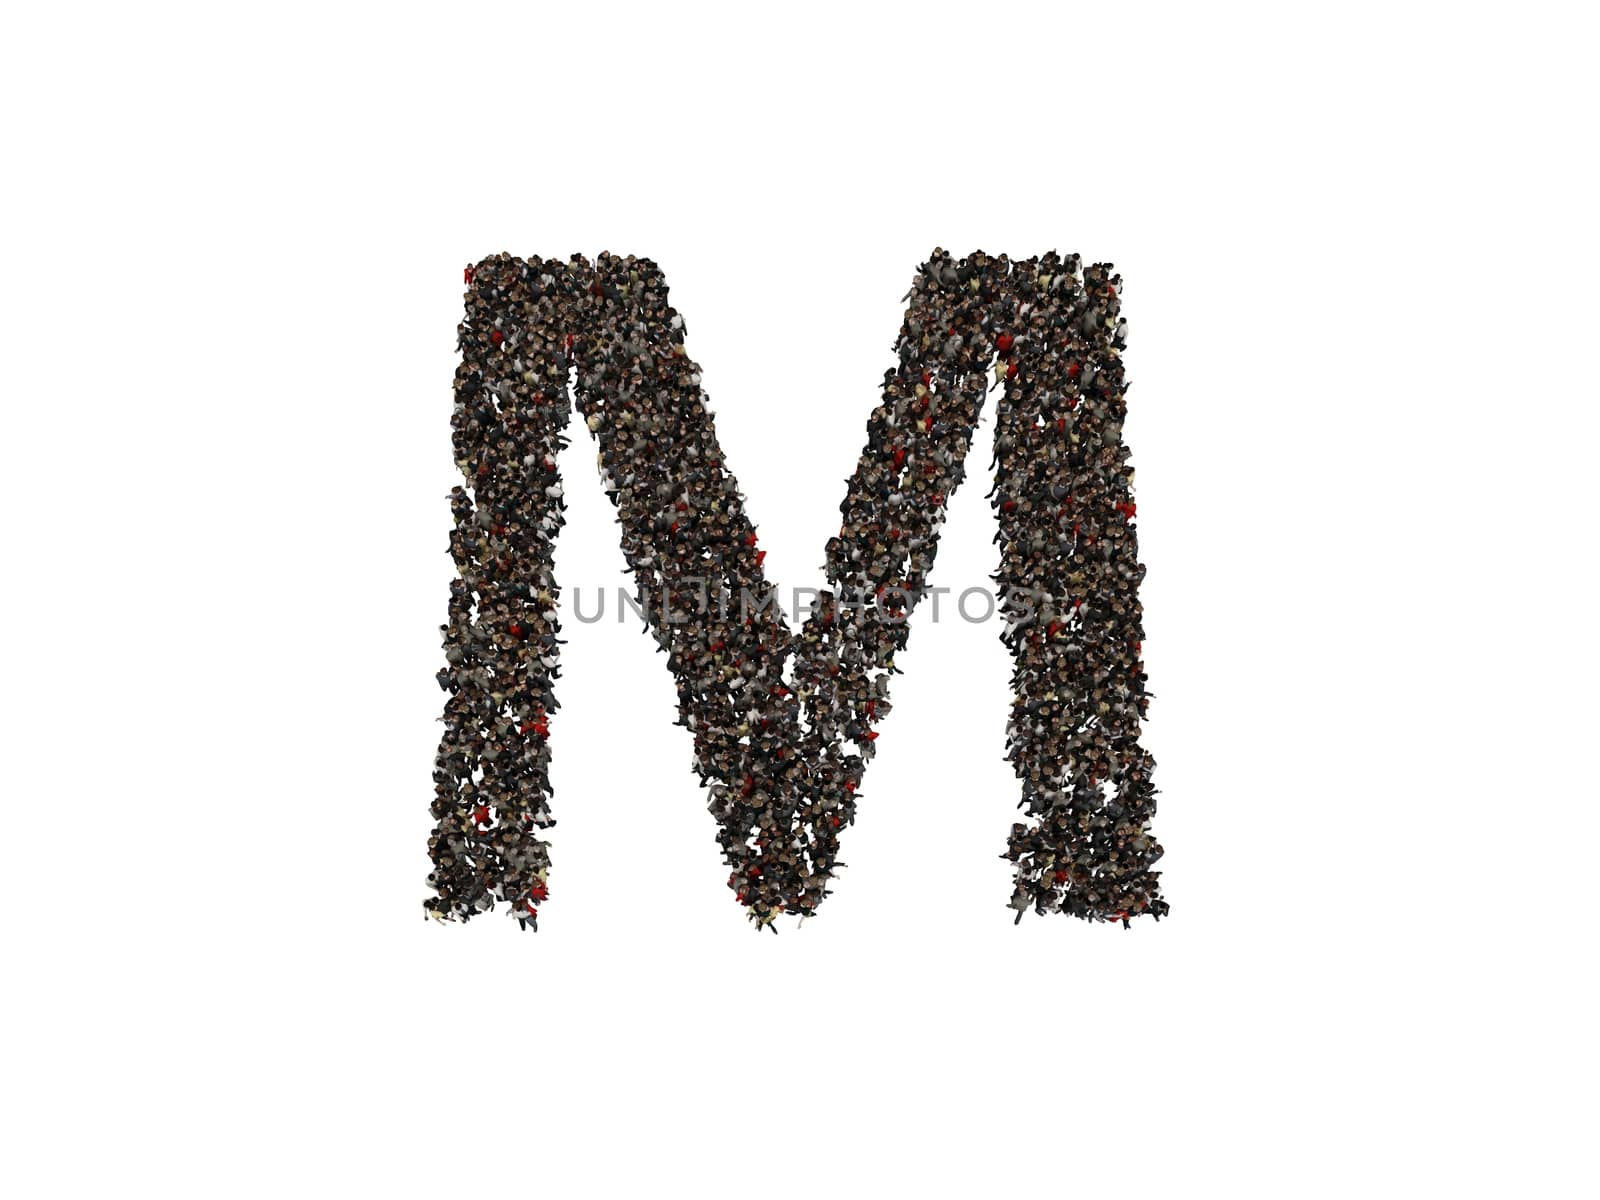 3d characters forming the letter M by fares139